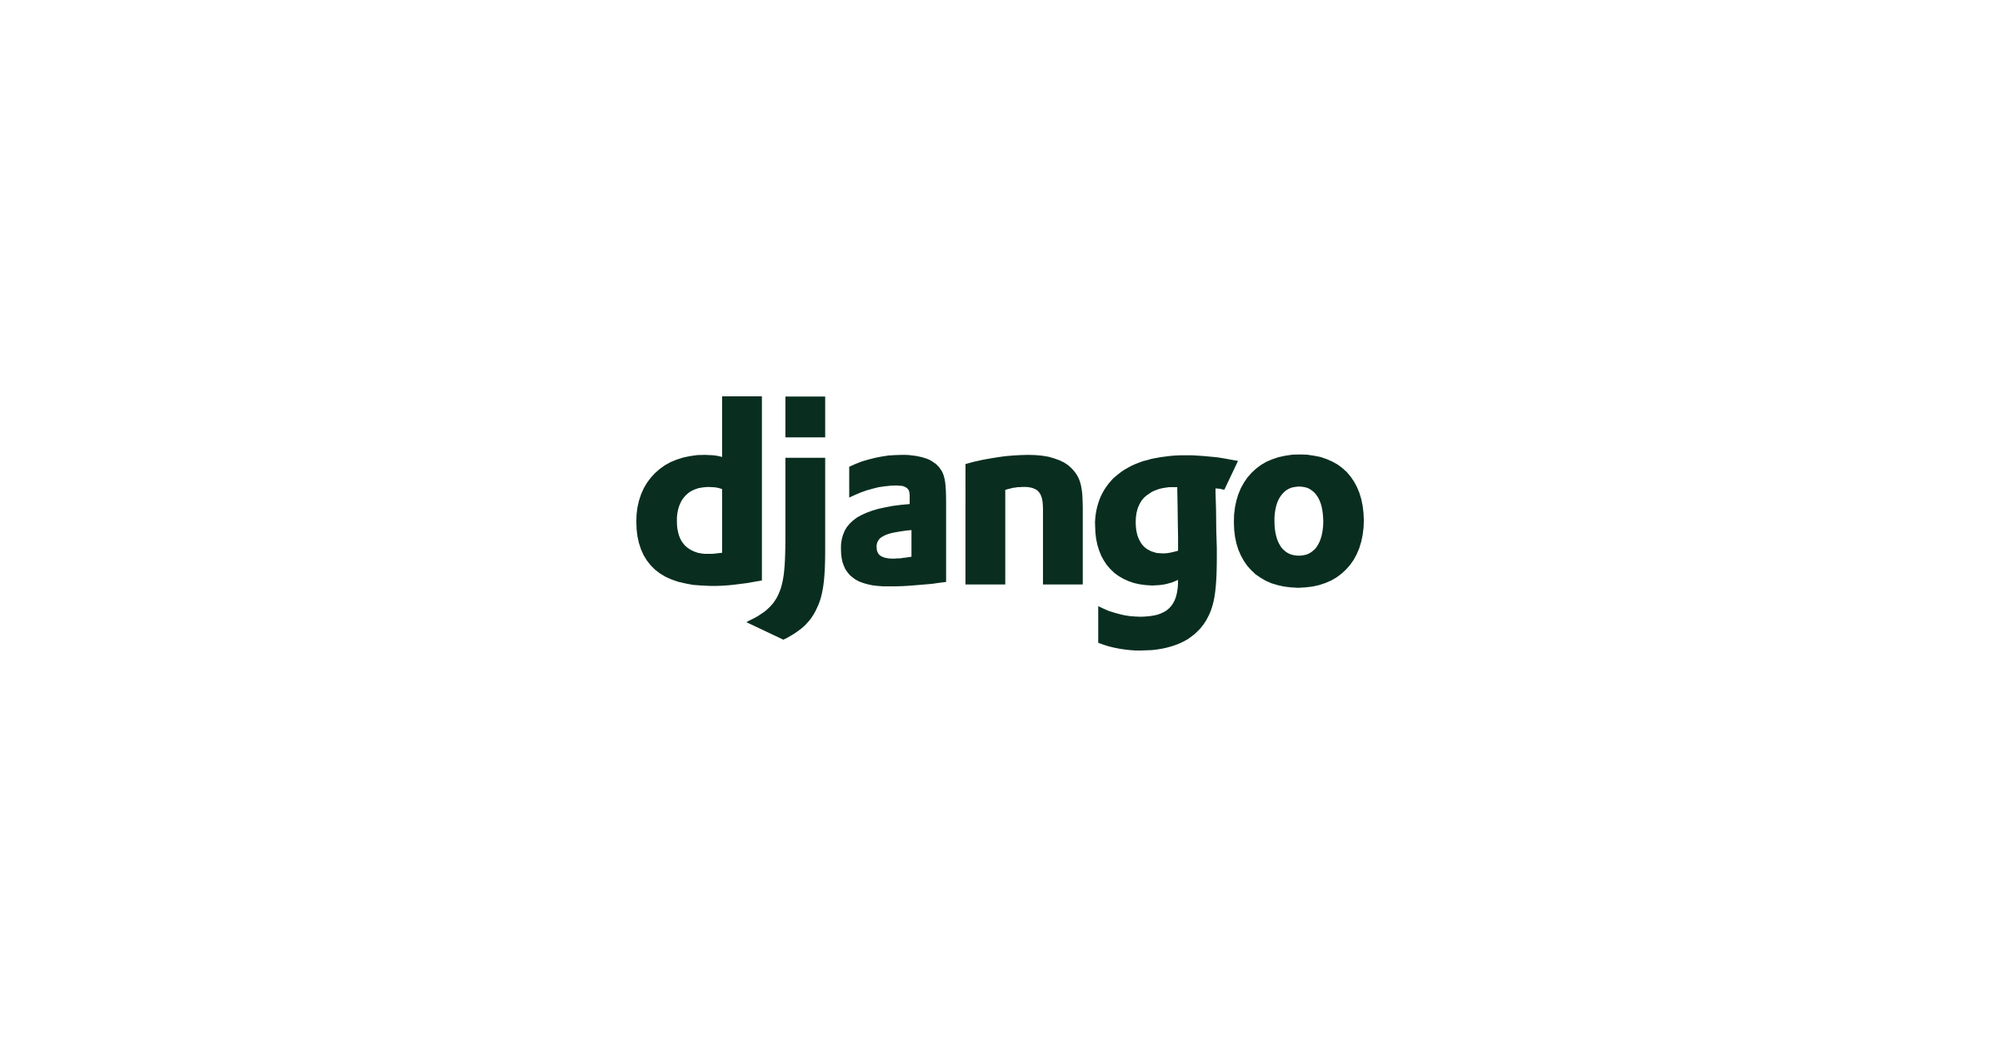 How to Deploy Django Static Files in Nginx